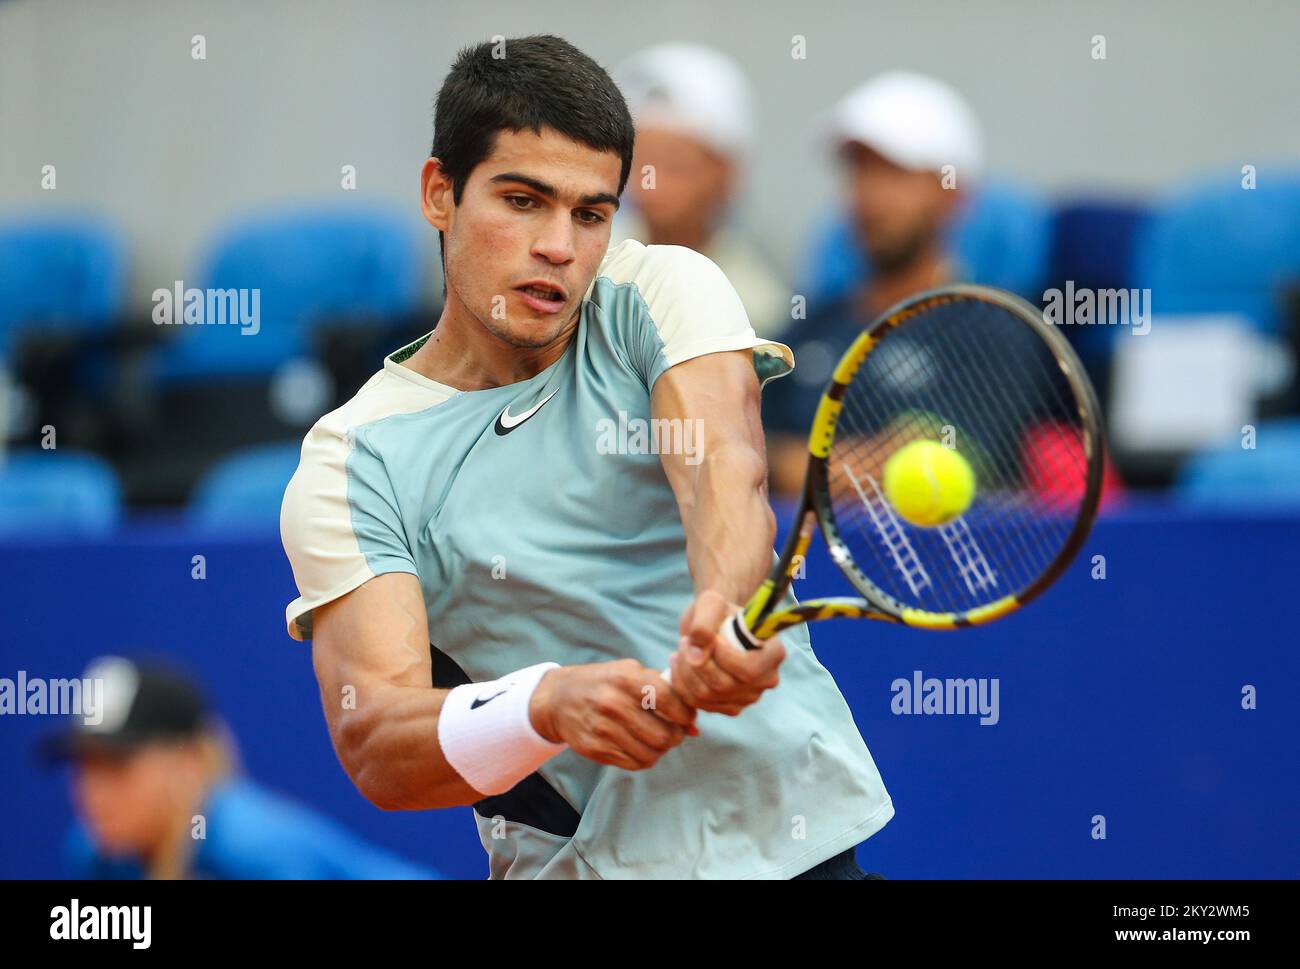 UMAG, CROATIA - JULY 30: Carlos Alcaraz of Spain play against Giulio  Zeppieri of Italy during Menâ€™s Single semifinal match on Day 7 of the  2022 Croatia Open Umag at Goran Ivanisevic